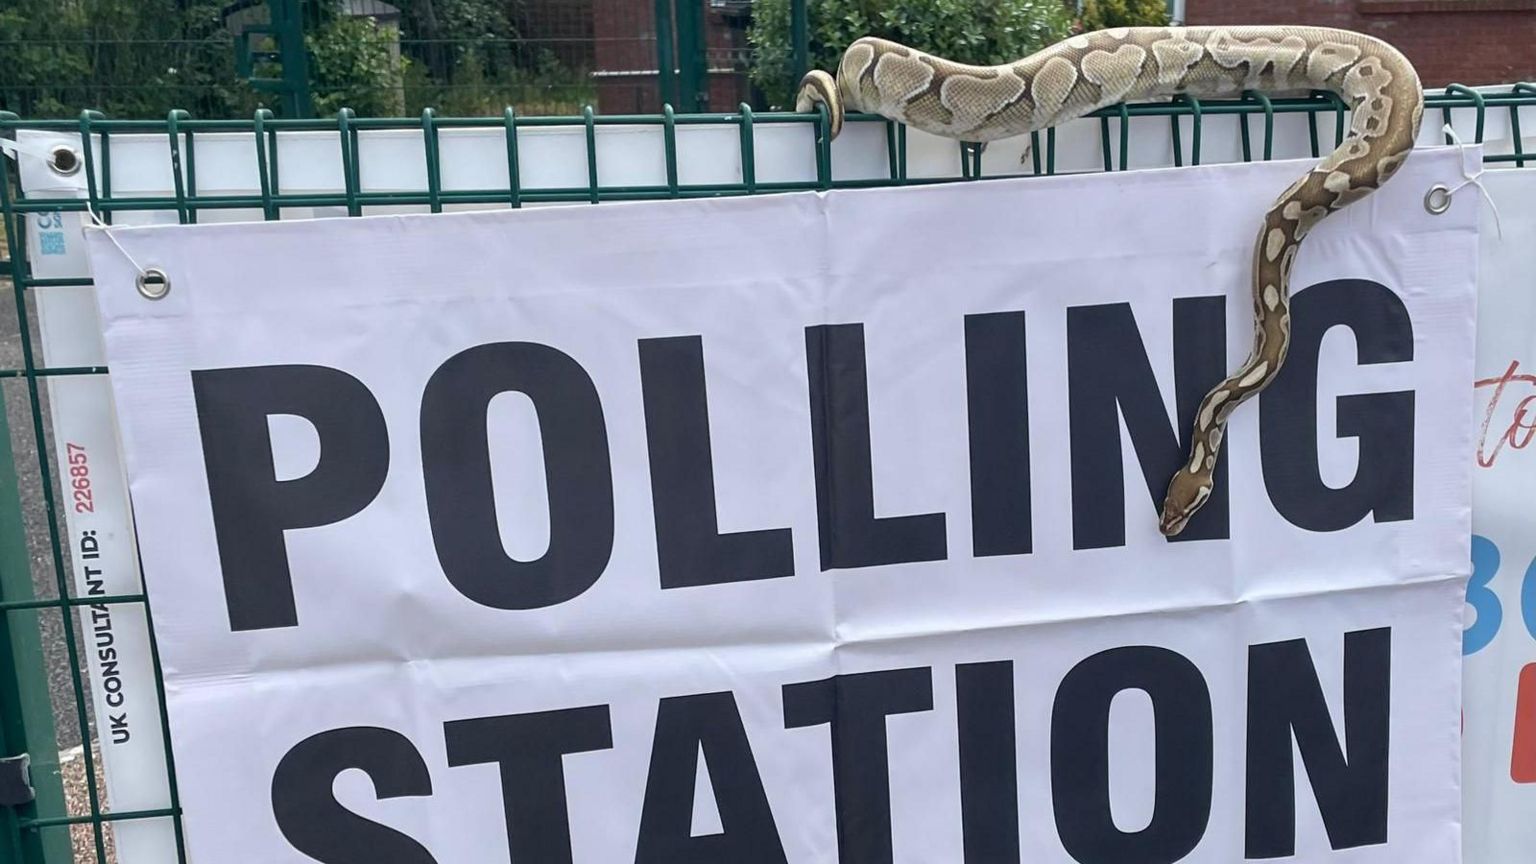 A snake on top of a green fence which has a sign attached that says "polling station"